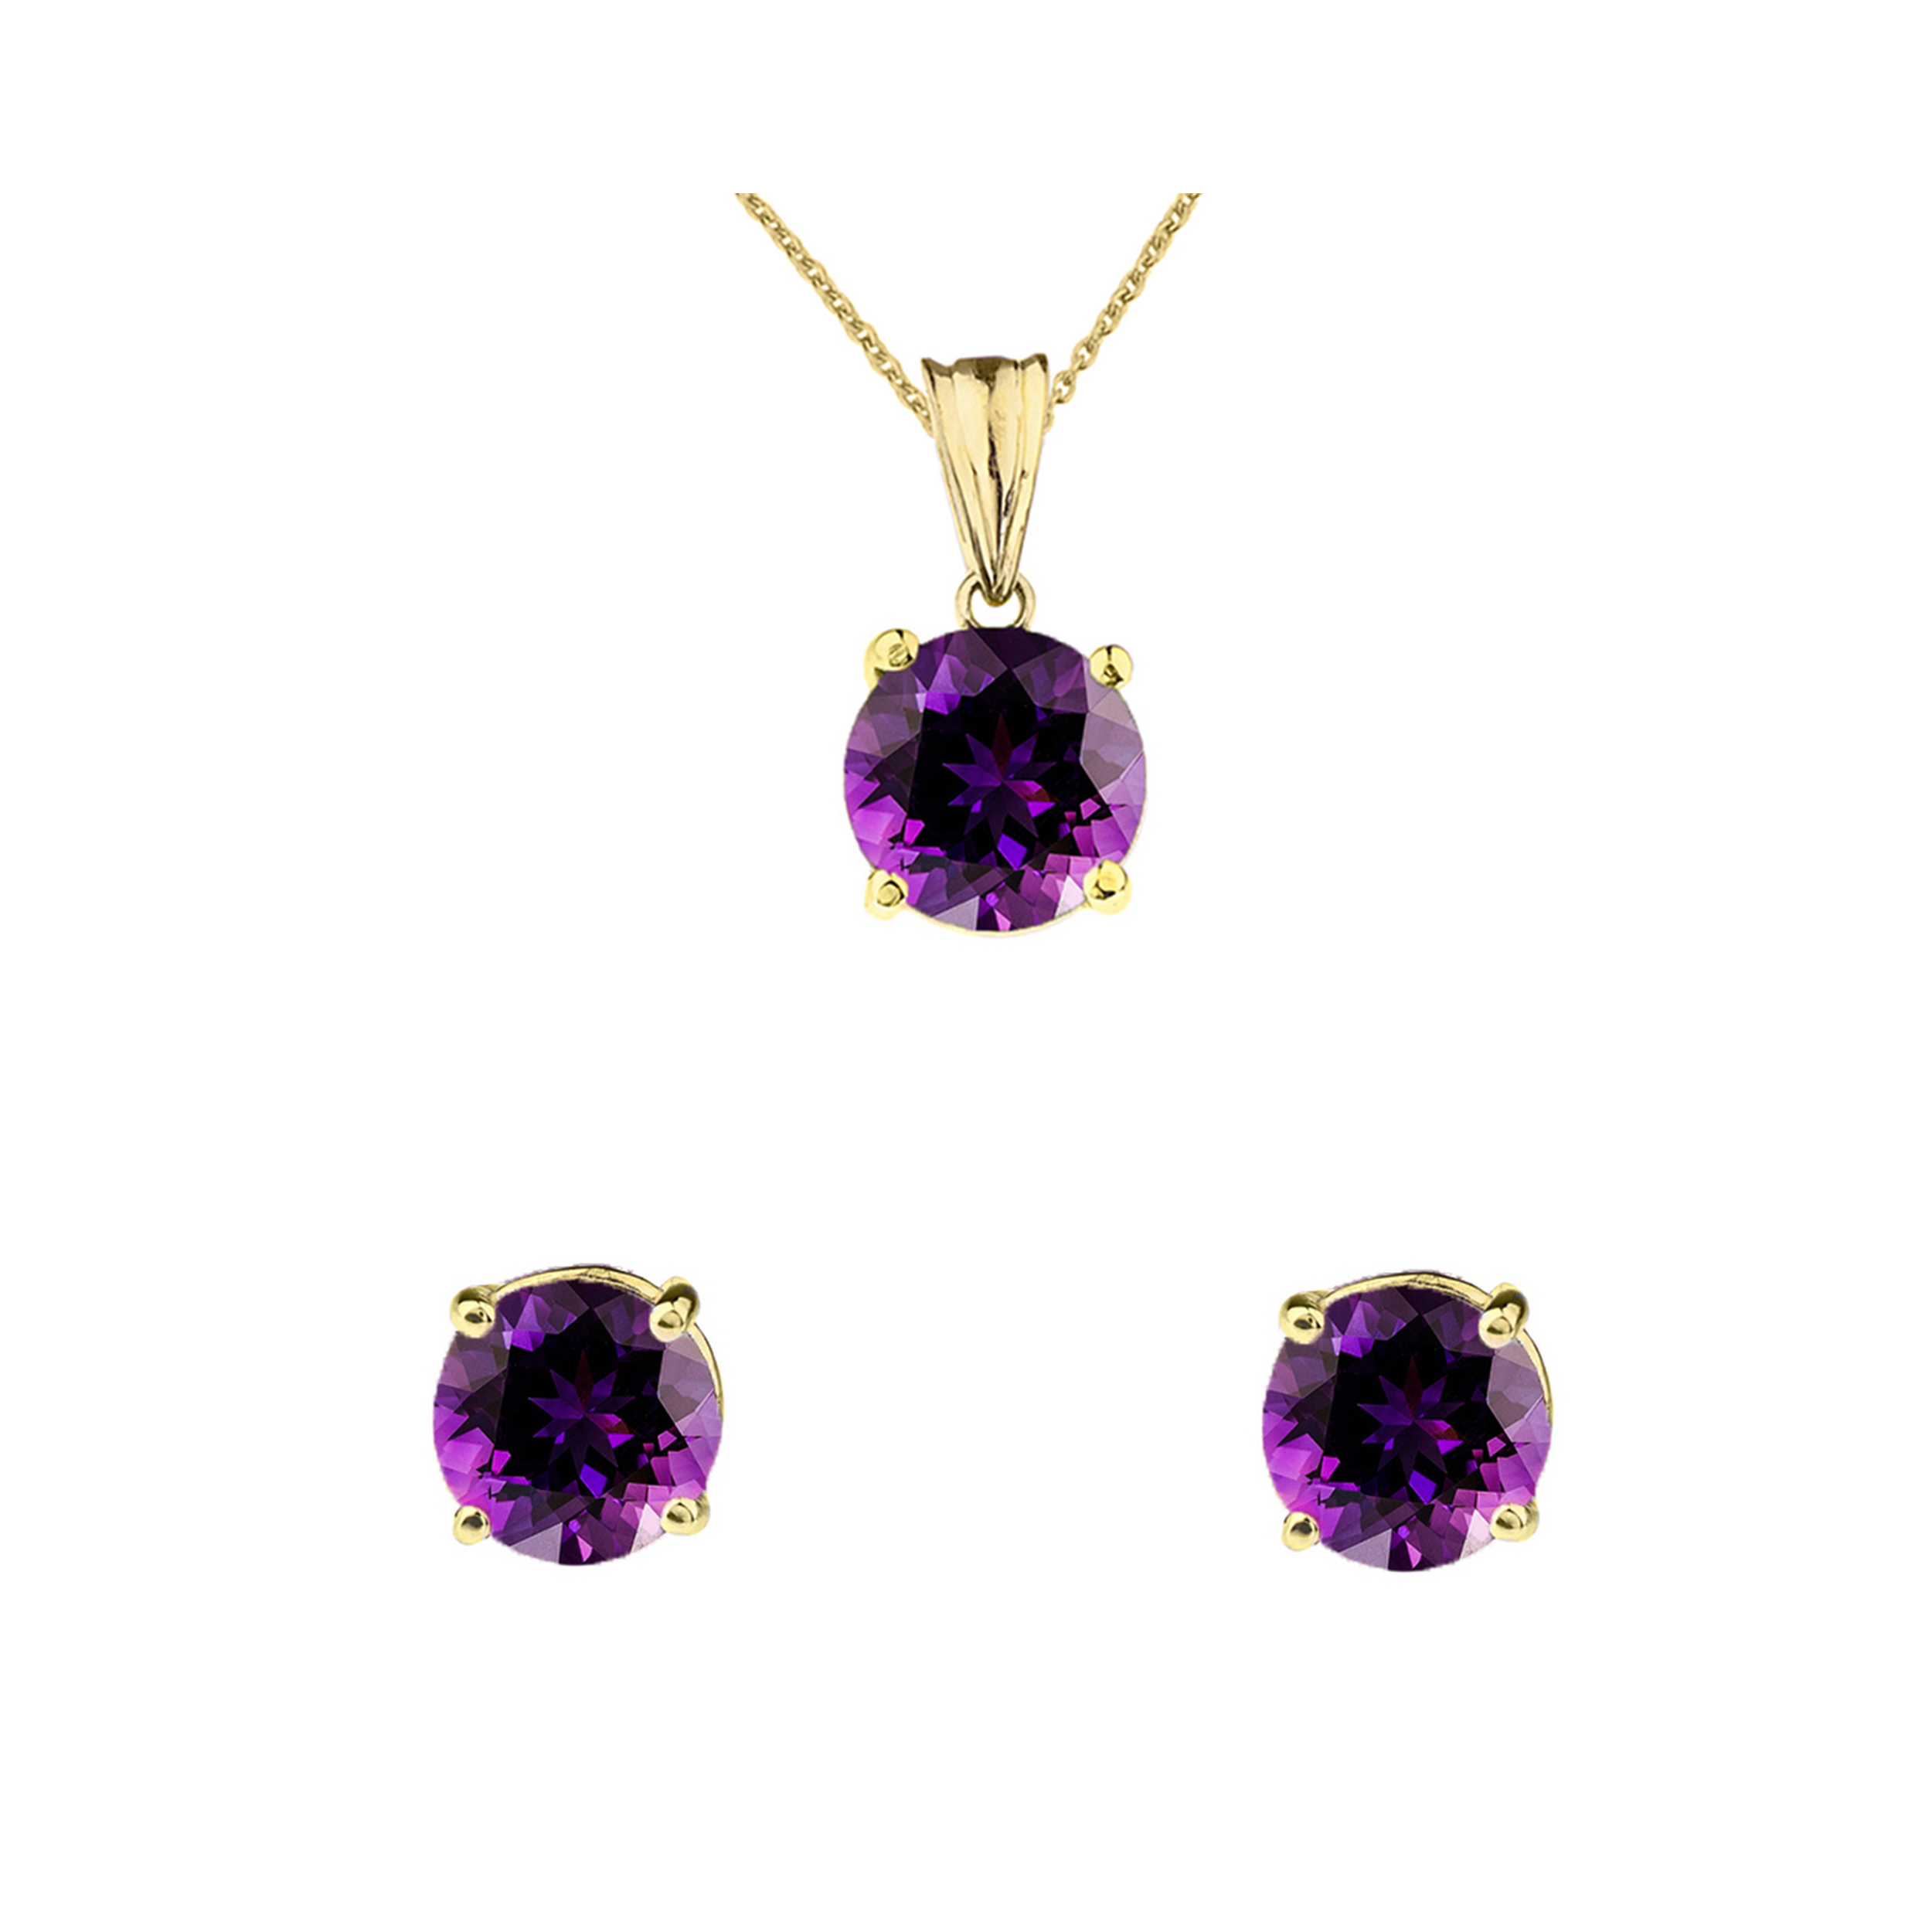 Bonjour Jewelers 4 Cttw Round Amethyst 18 Inch Necklace In Earring Set 14k Gold Plated